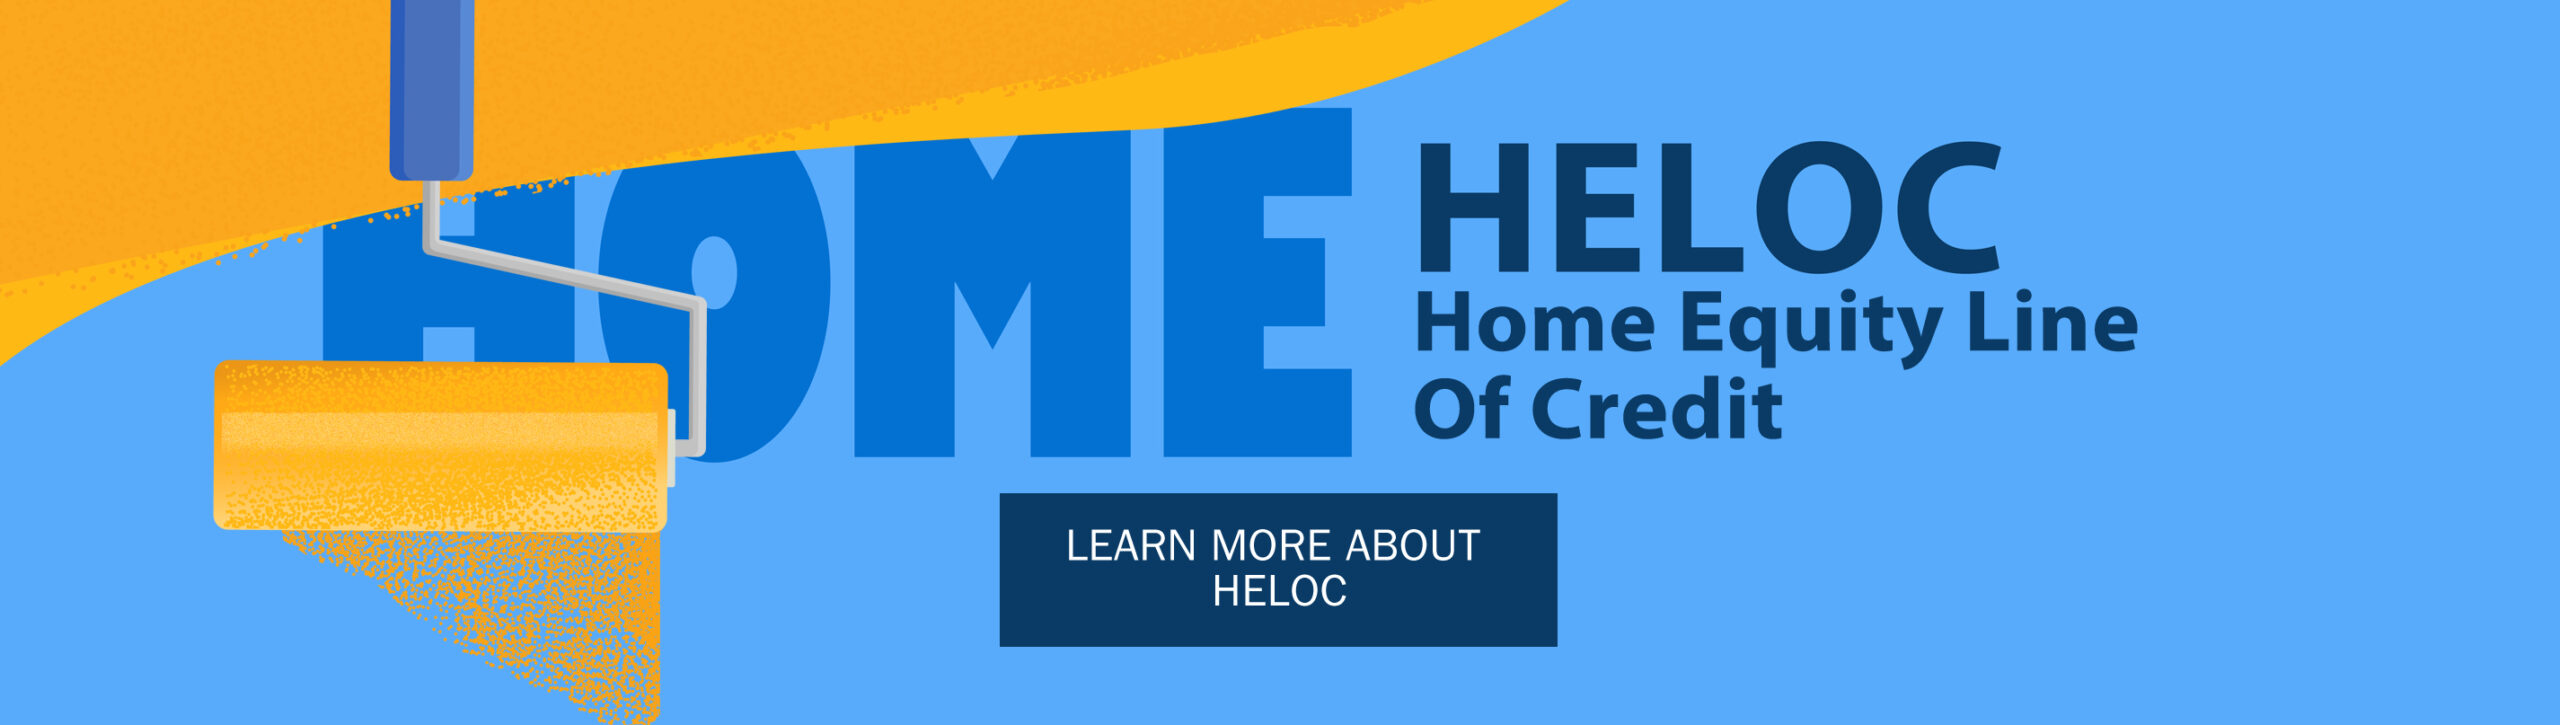 image of paint-roller applying yellow paint to blue background. HELOC, Home Equity Line Of Credit. Learn more about HELOC.